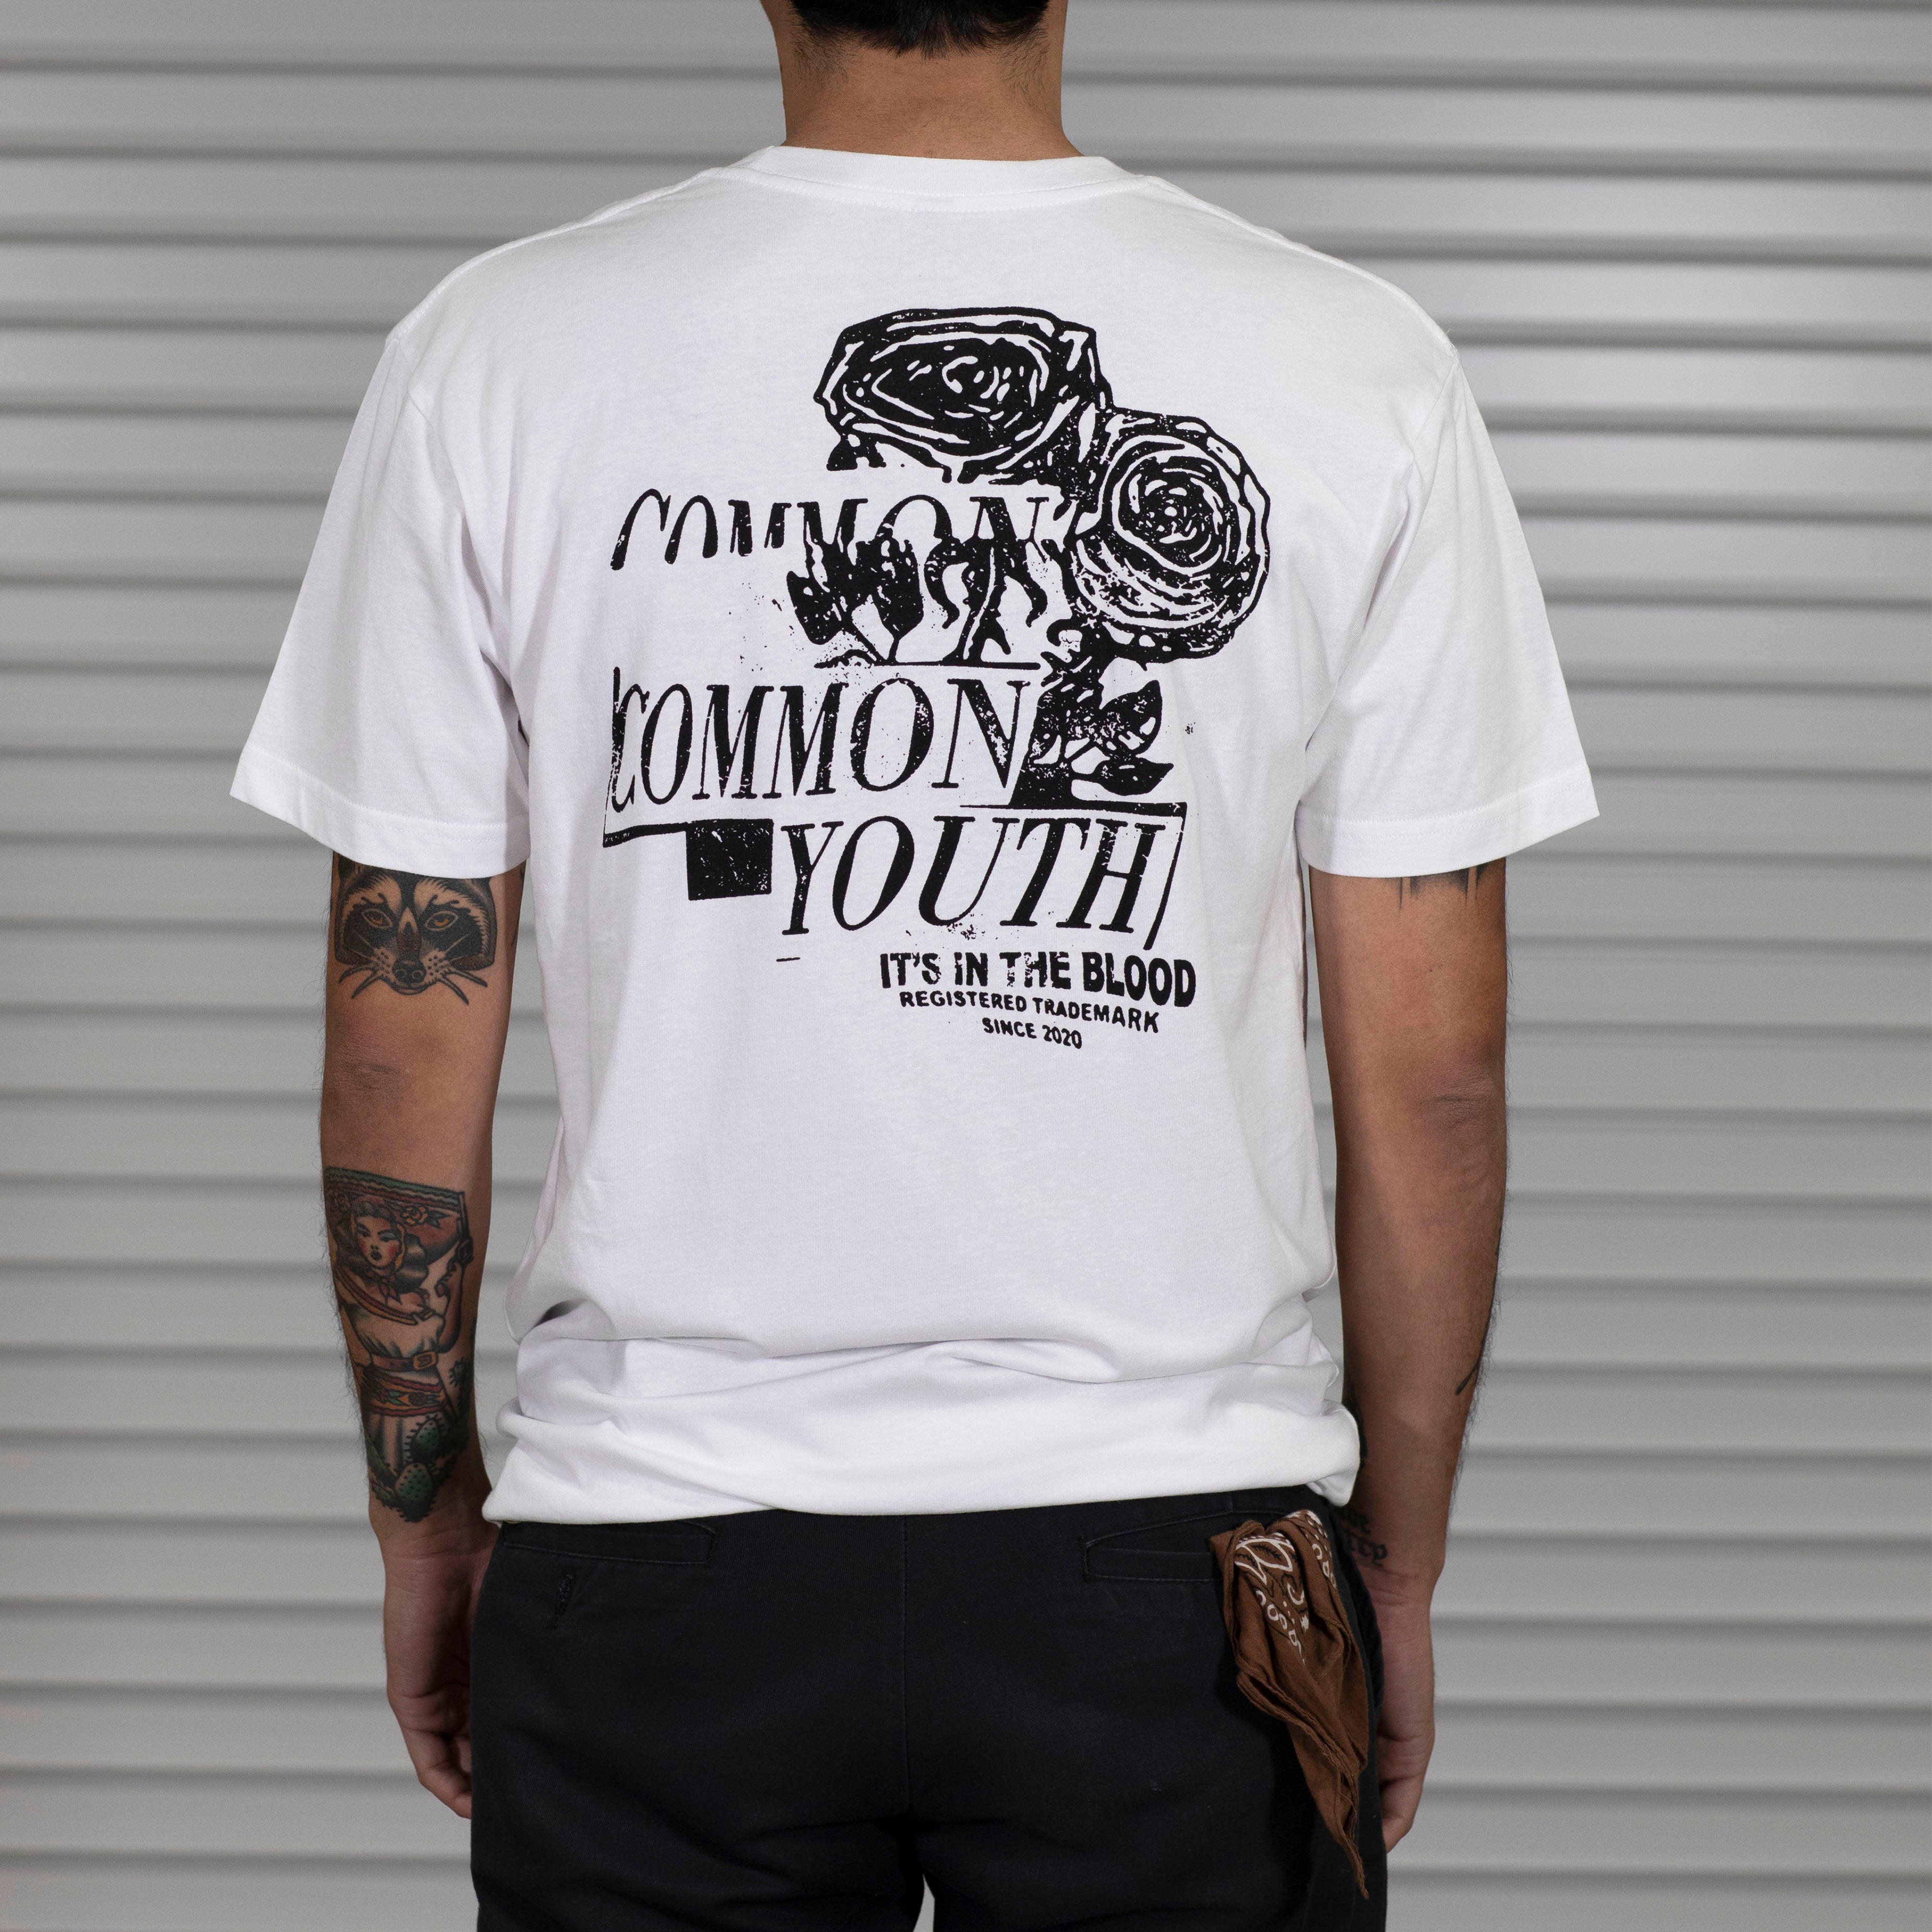 TITLE SS - commonyouthbrand